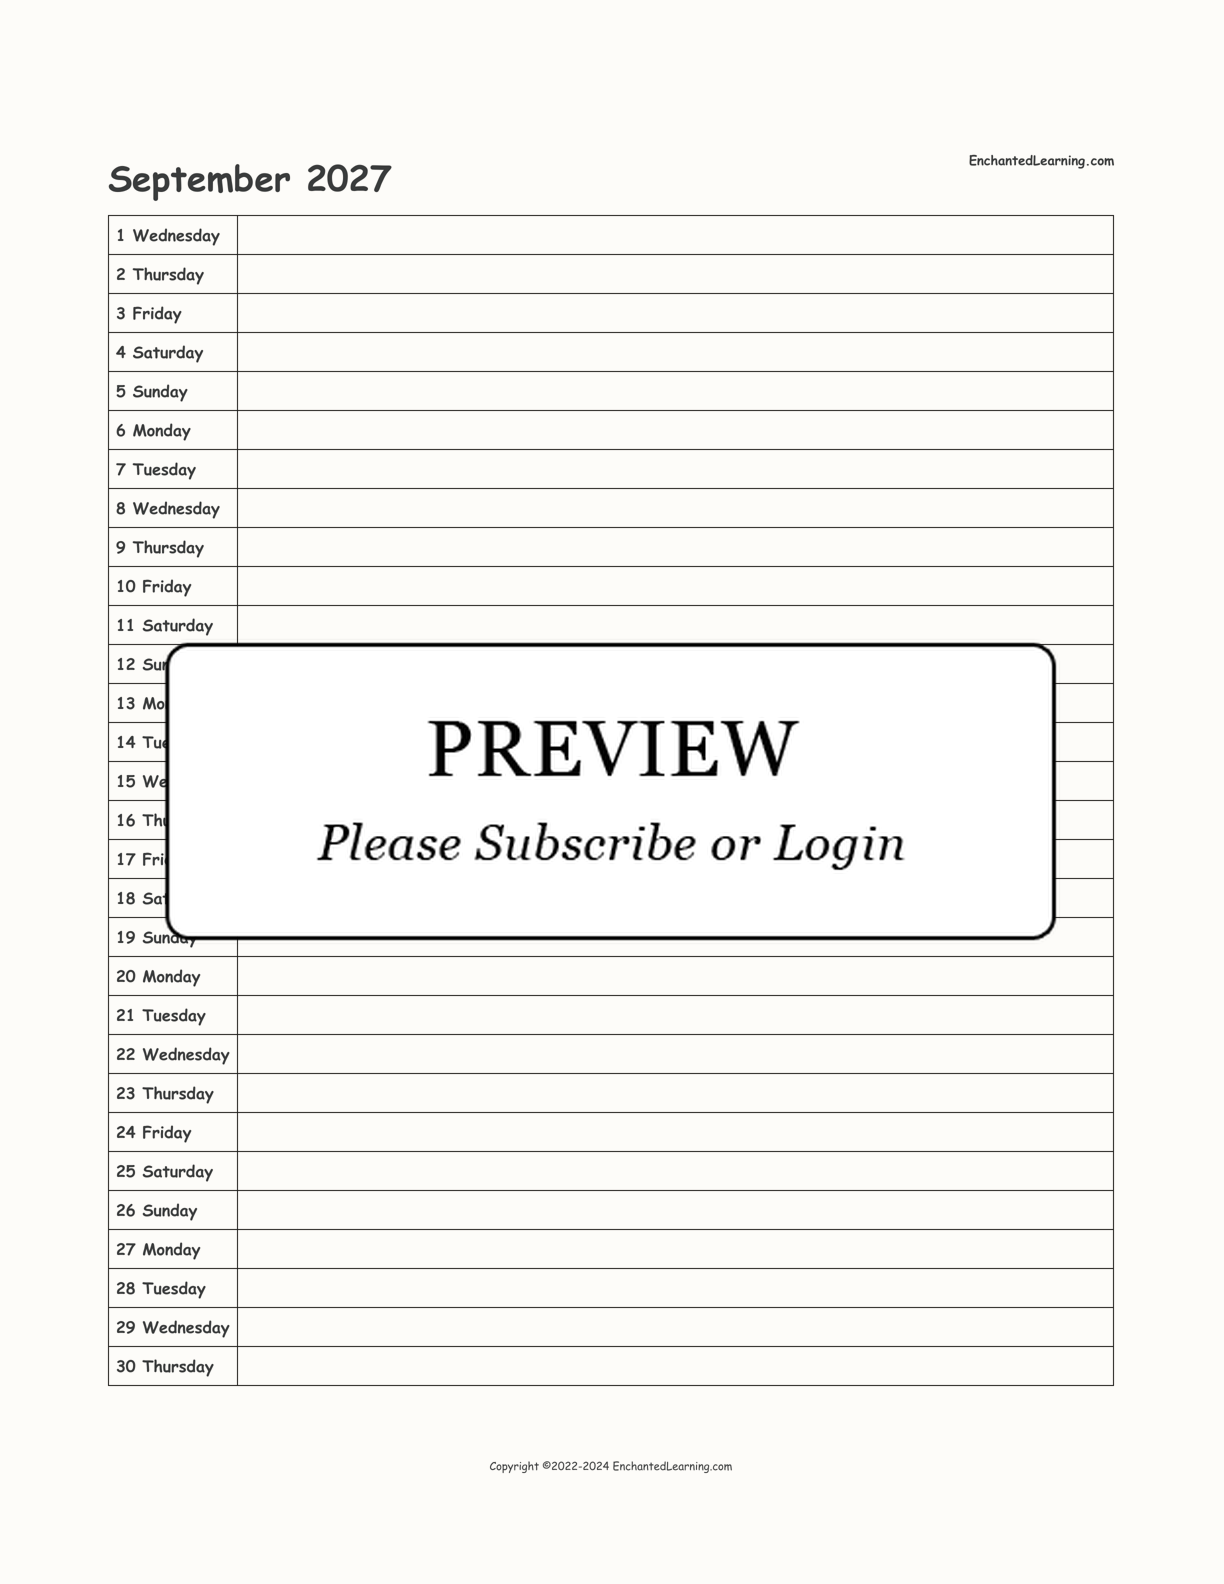 2027 Scheduling Calendar interactive printout page 9